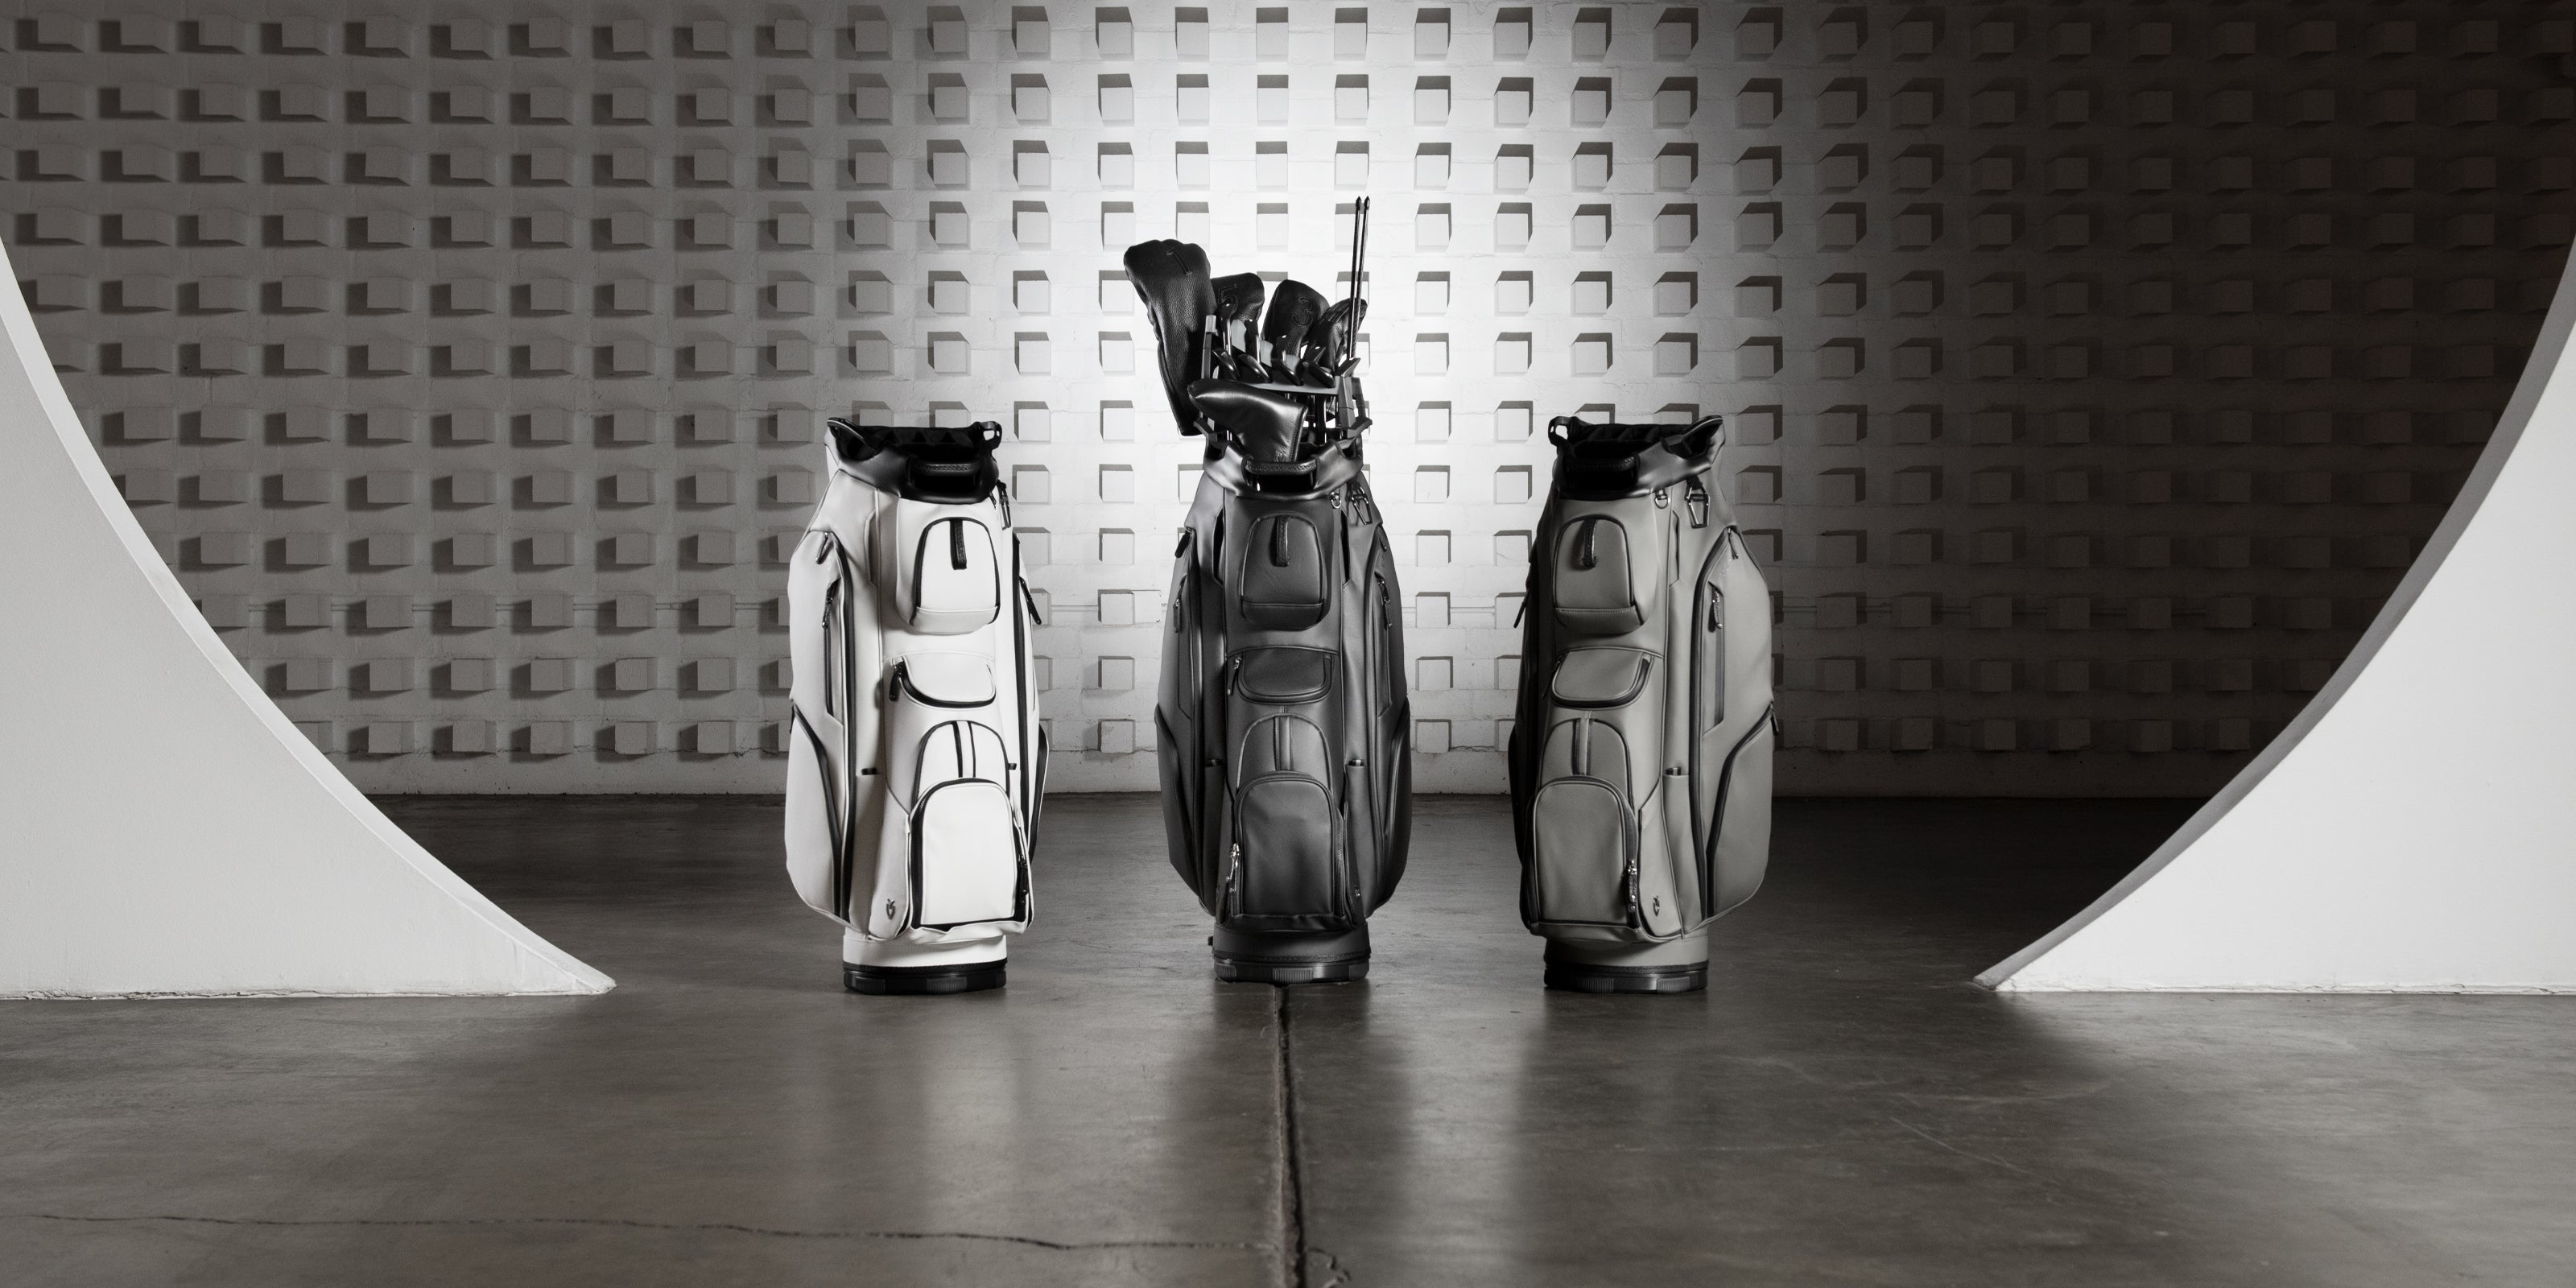 White, Black, and grey golf cart bags in large warehouse